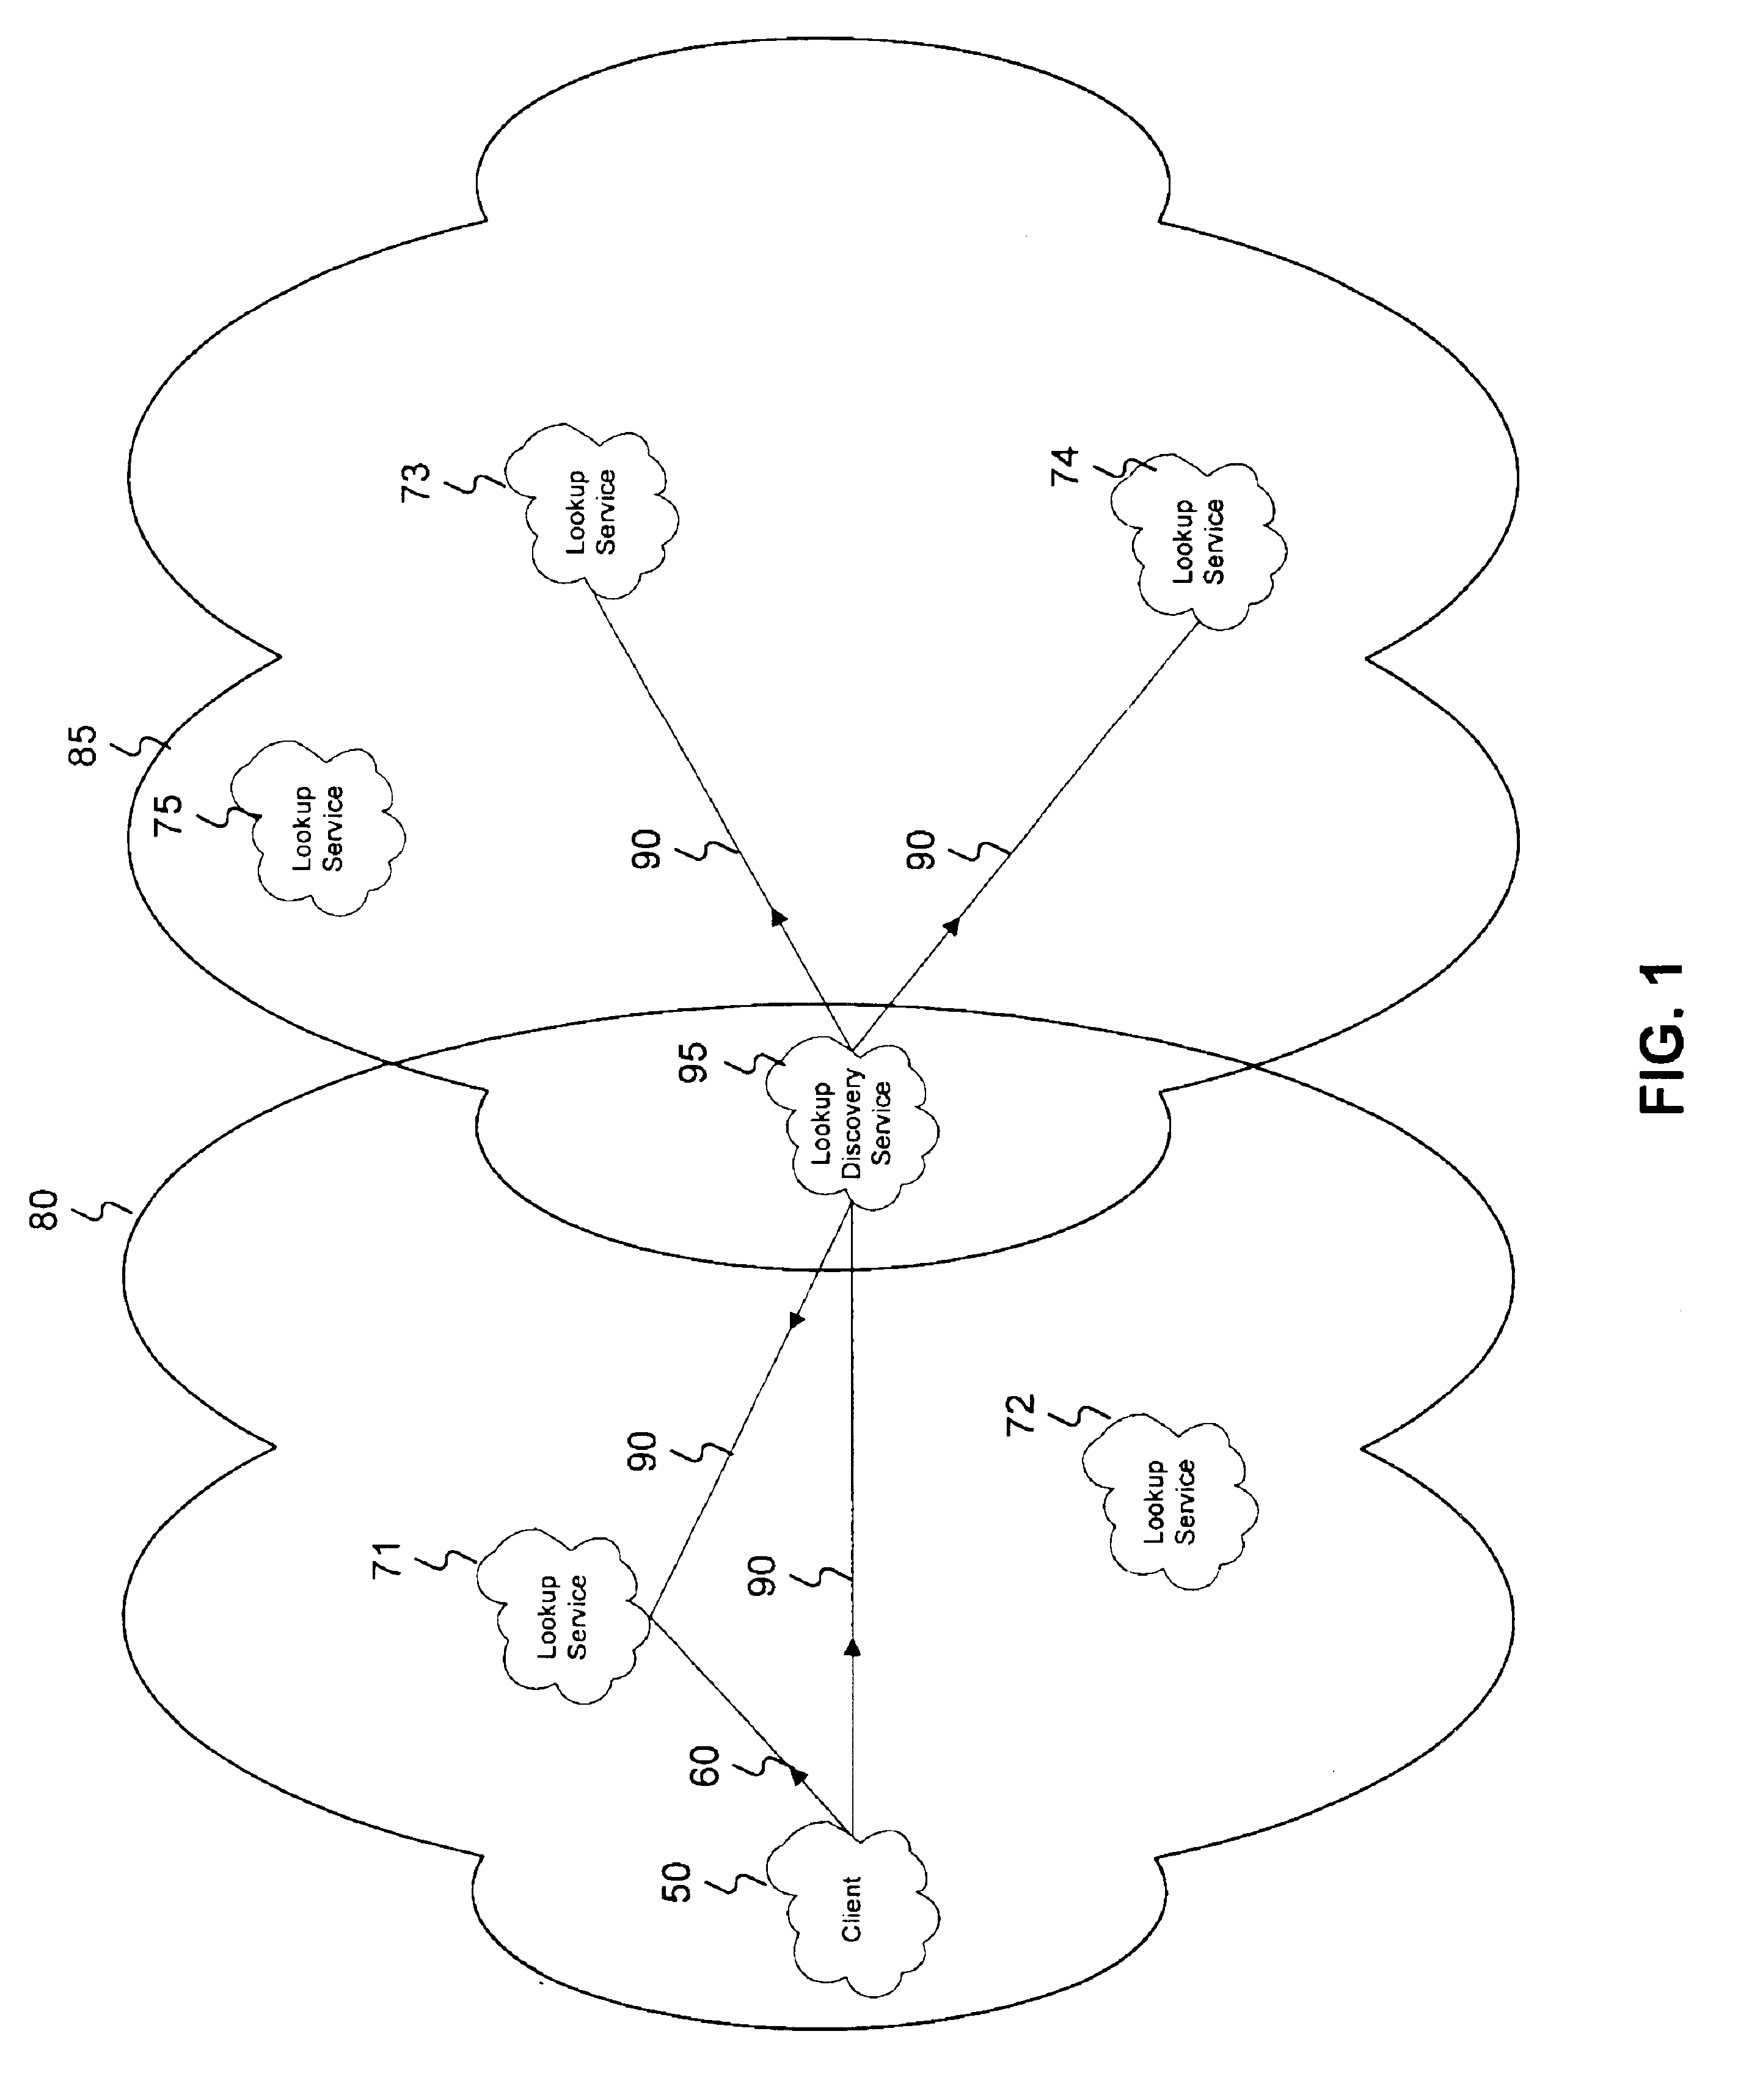 Lookup discovery service in a distributed system having a plurality of lookup services each with associated characteristics and services